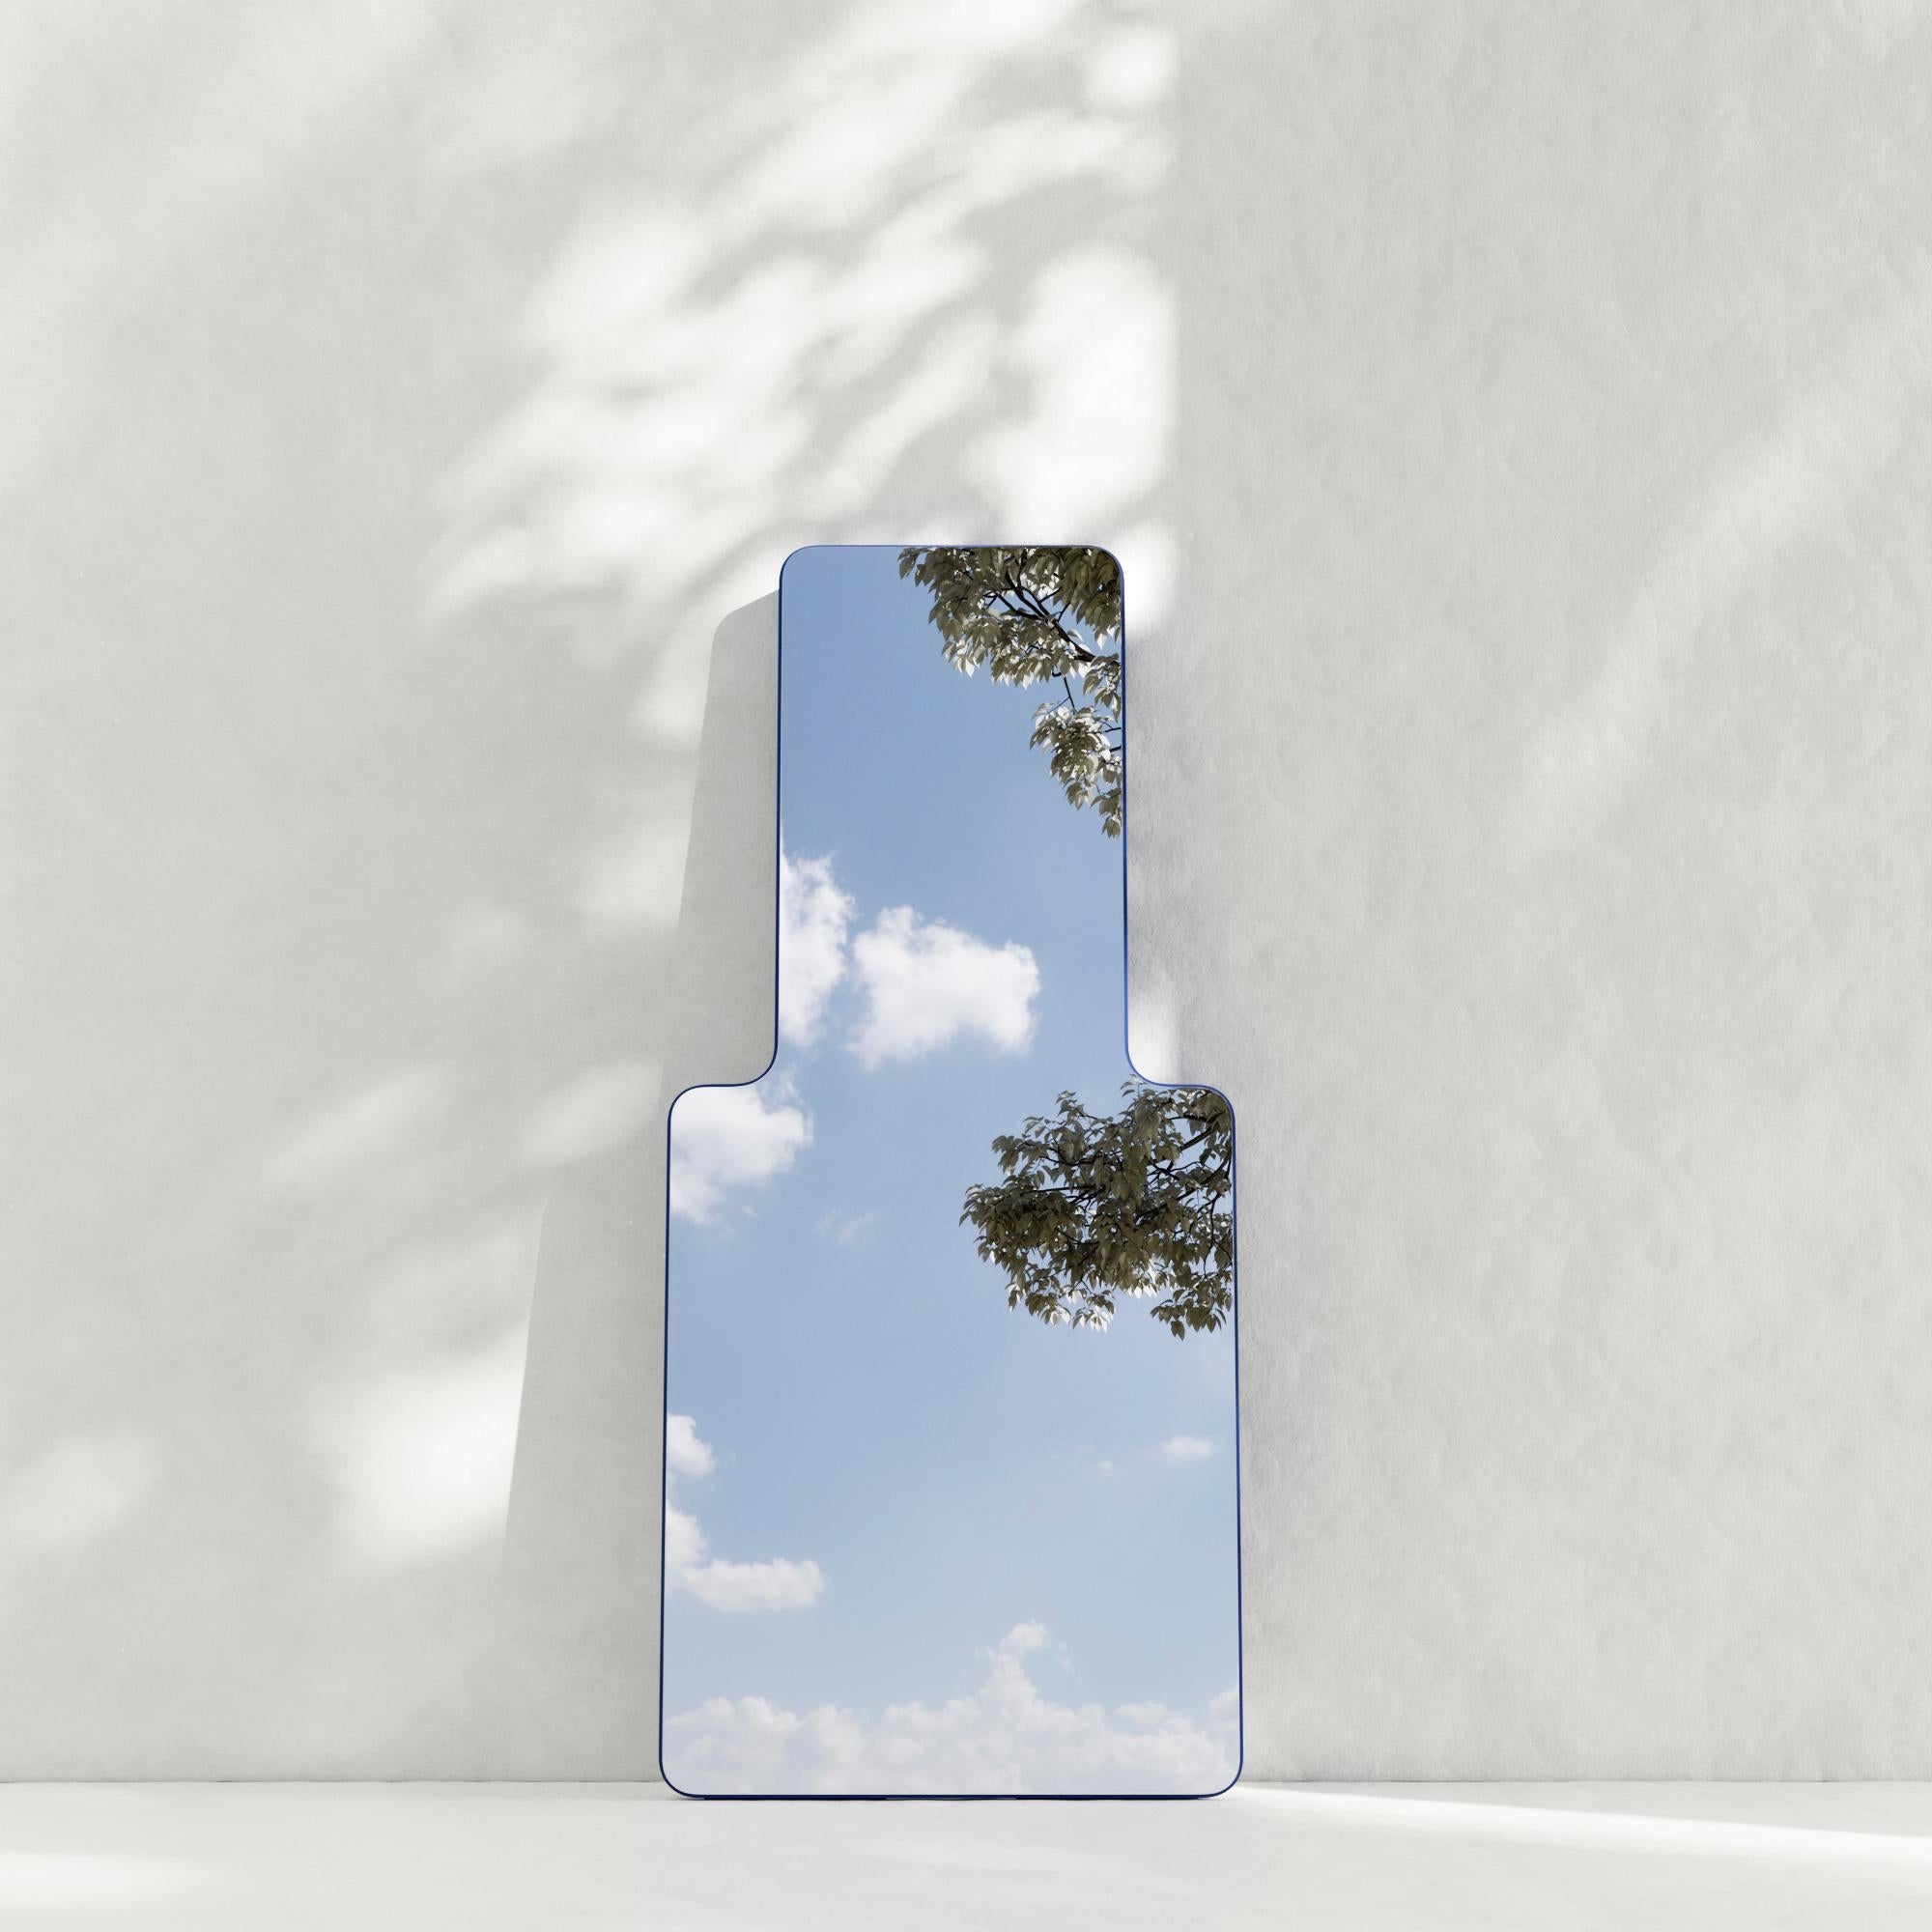 Loveself 03 mirror by Oito
Dimensions: D 70 x W 4 x H 180 cm
Materials:Peinting mdf, silver glass mirror

LOVESELF is a collection of mirrors created by our team of designers oito design . The mission of our collection is to call everyone to